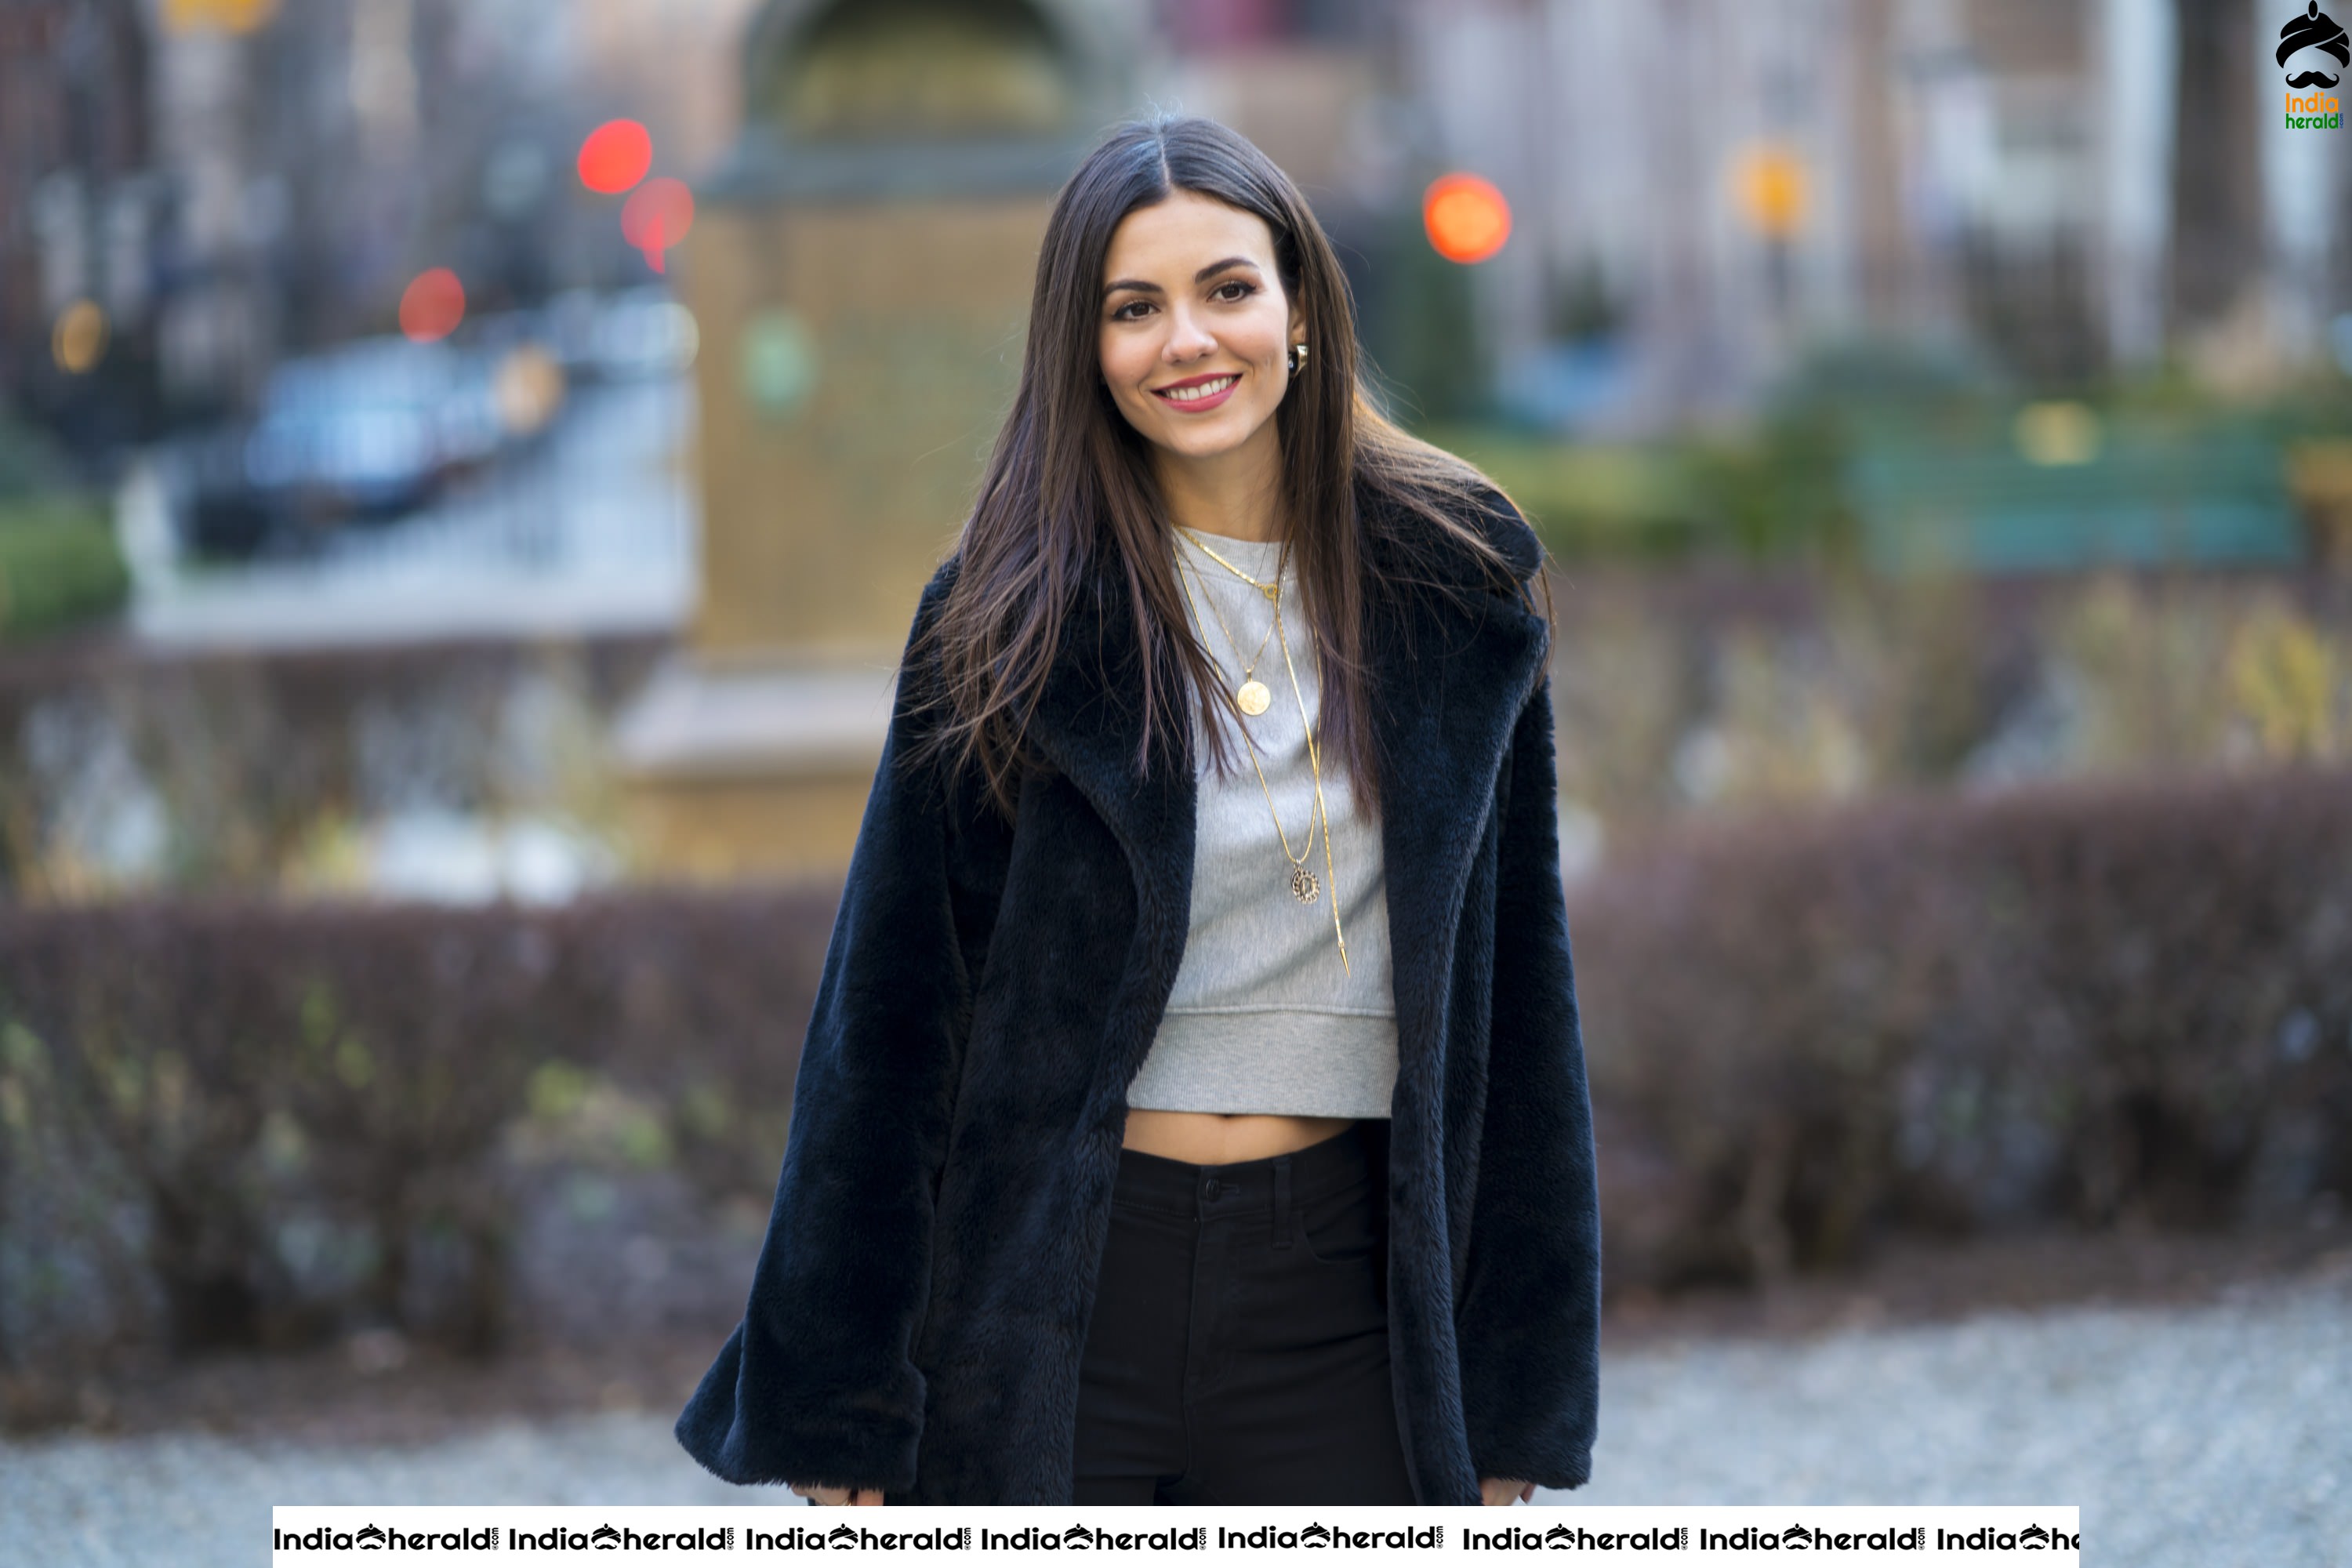 Victoria Justice Out in NYC